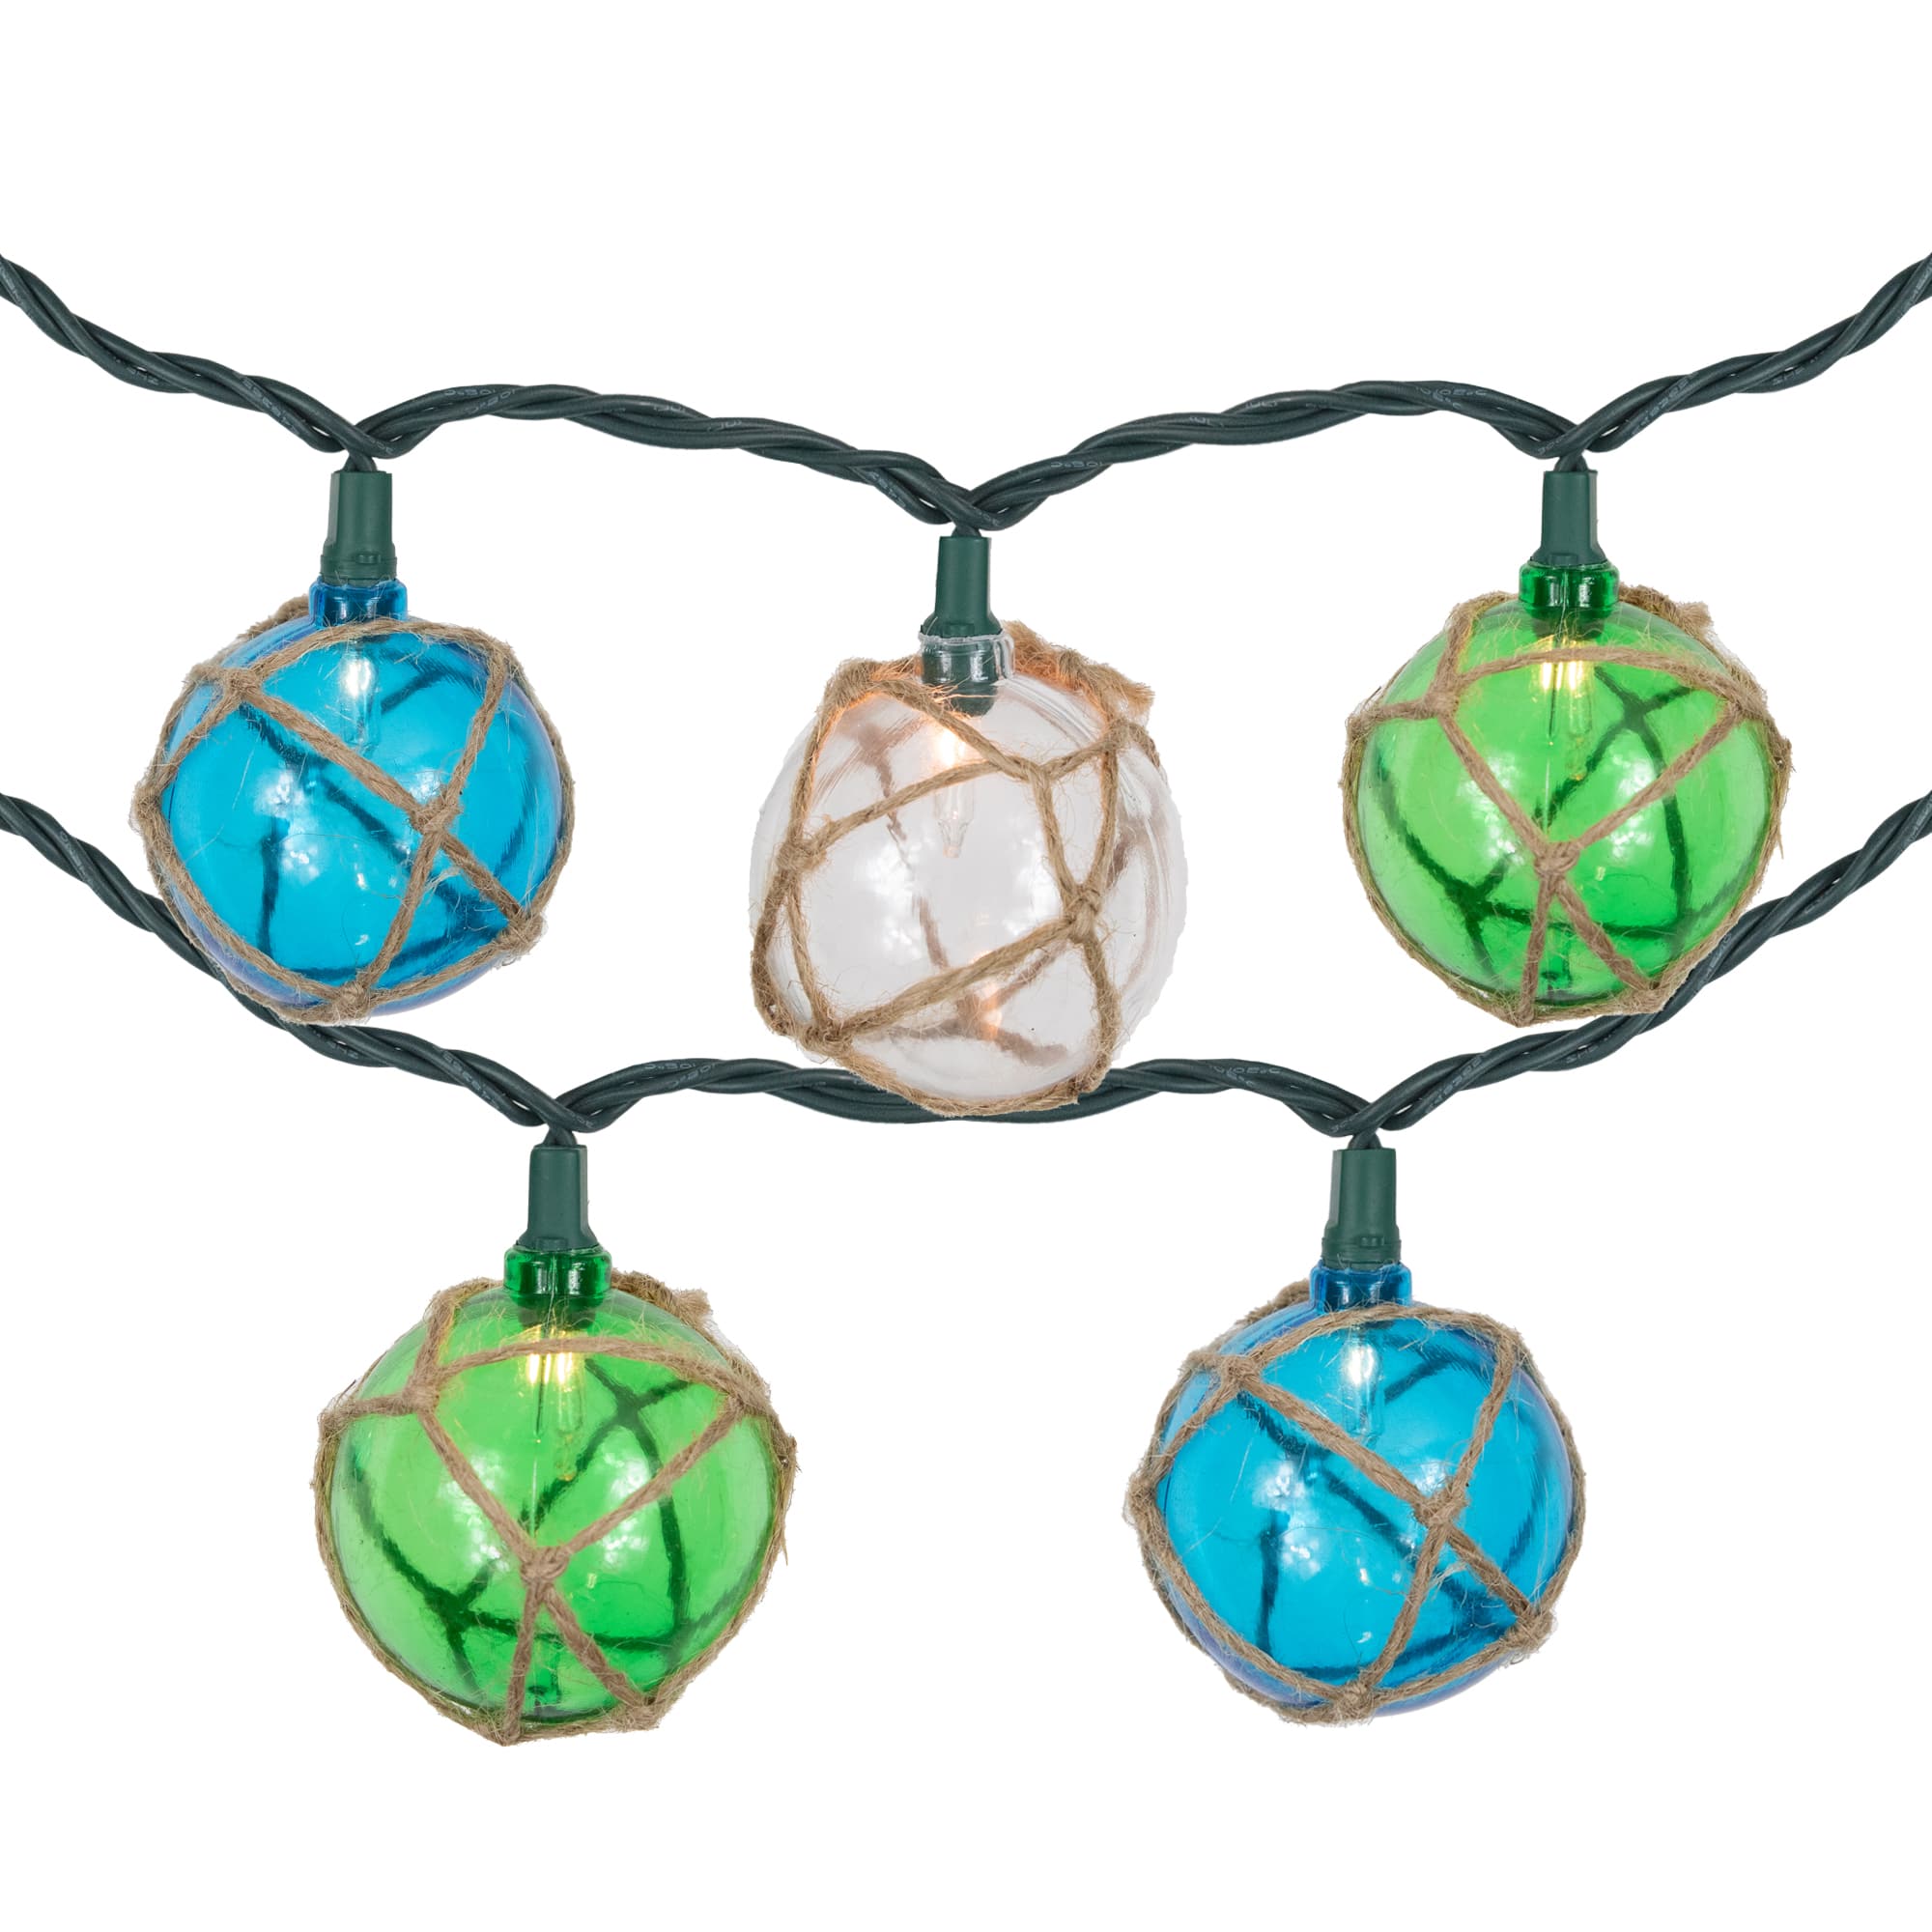 10ct. Natural Jute Wrapped Multicolor Ball String Lights with